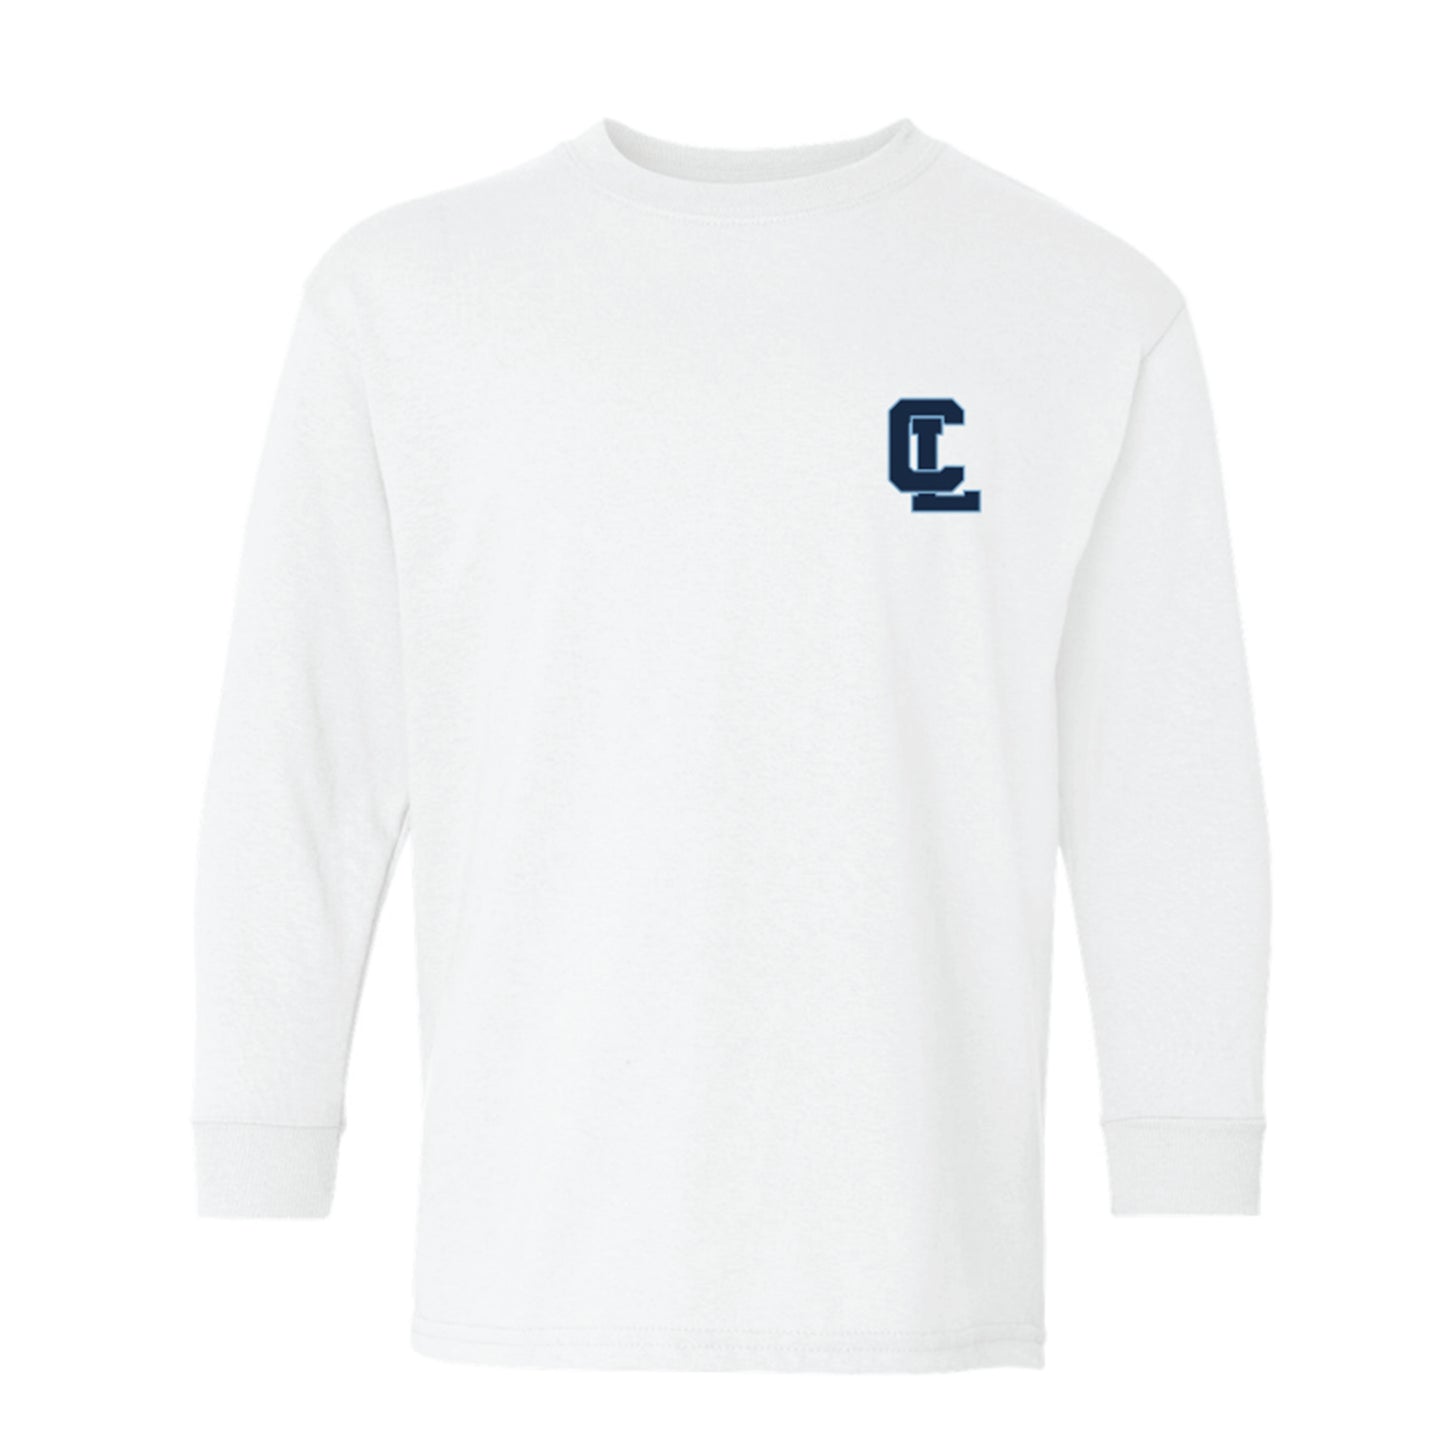 Youth LS Cotton Tee - CL